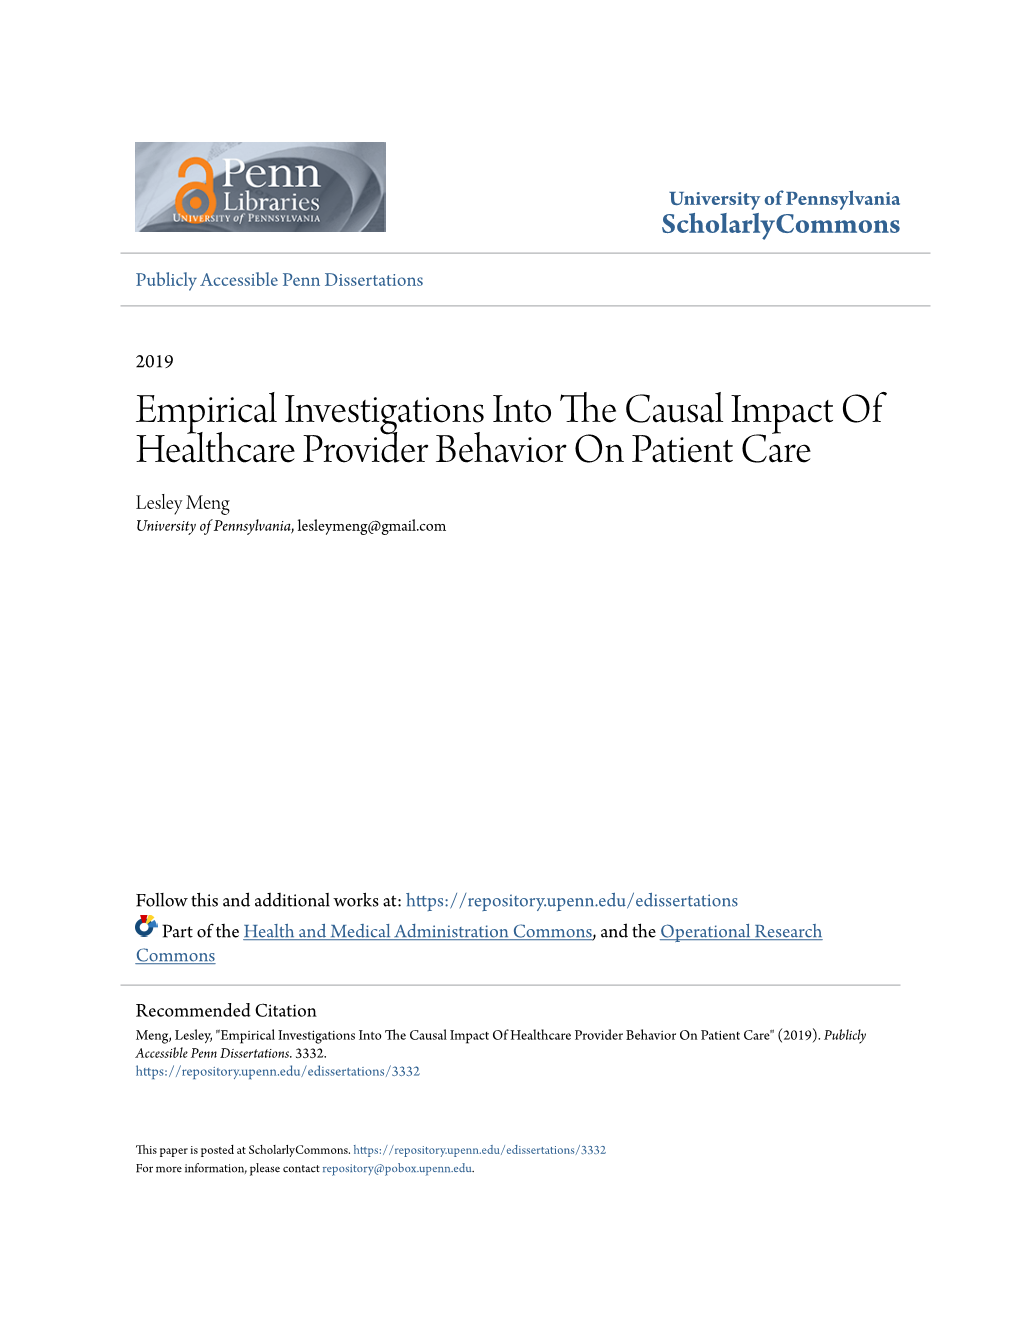 Empirical Investigations Into the Causal Impact of Healthcare Provider Behavior on Patient Care